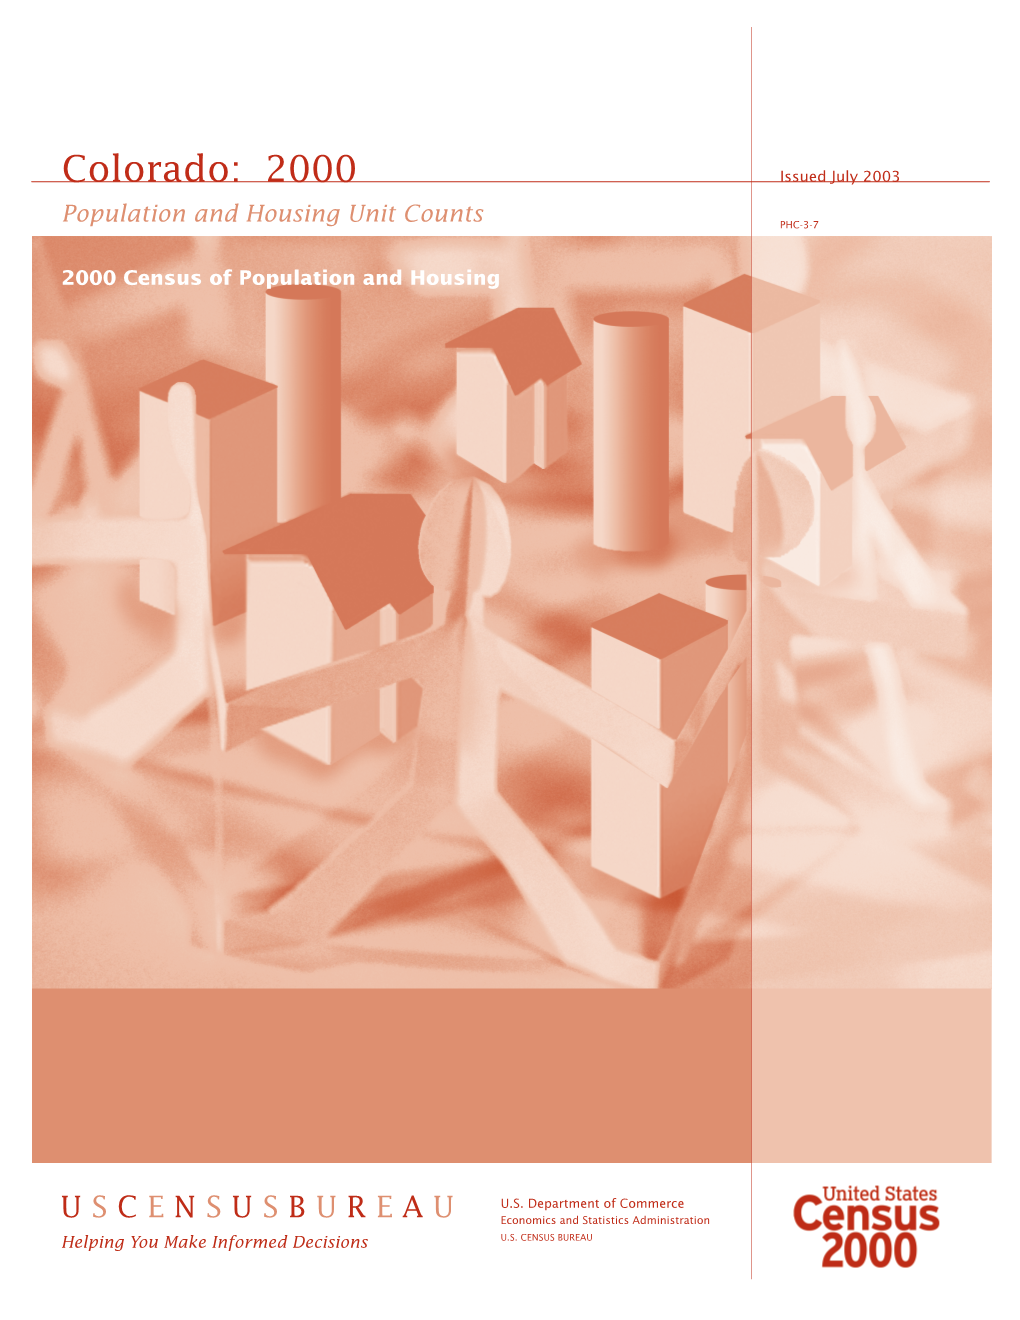 Population and Housing Unit Counts, Colorado: 2000